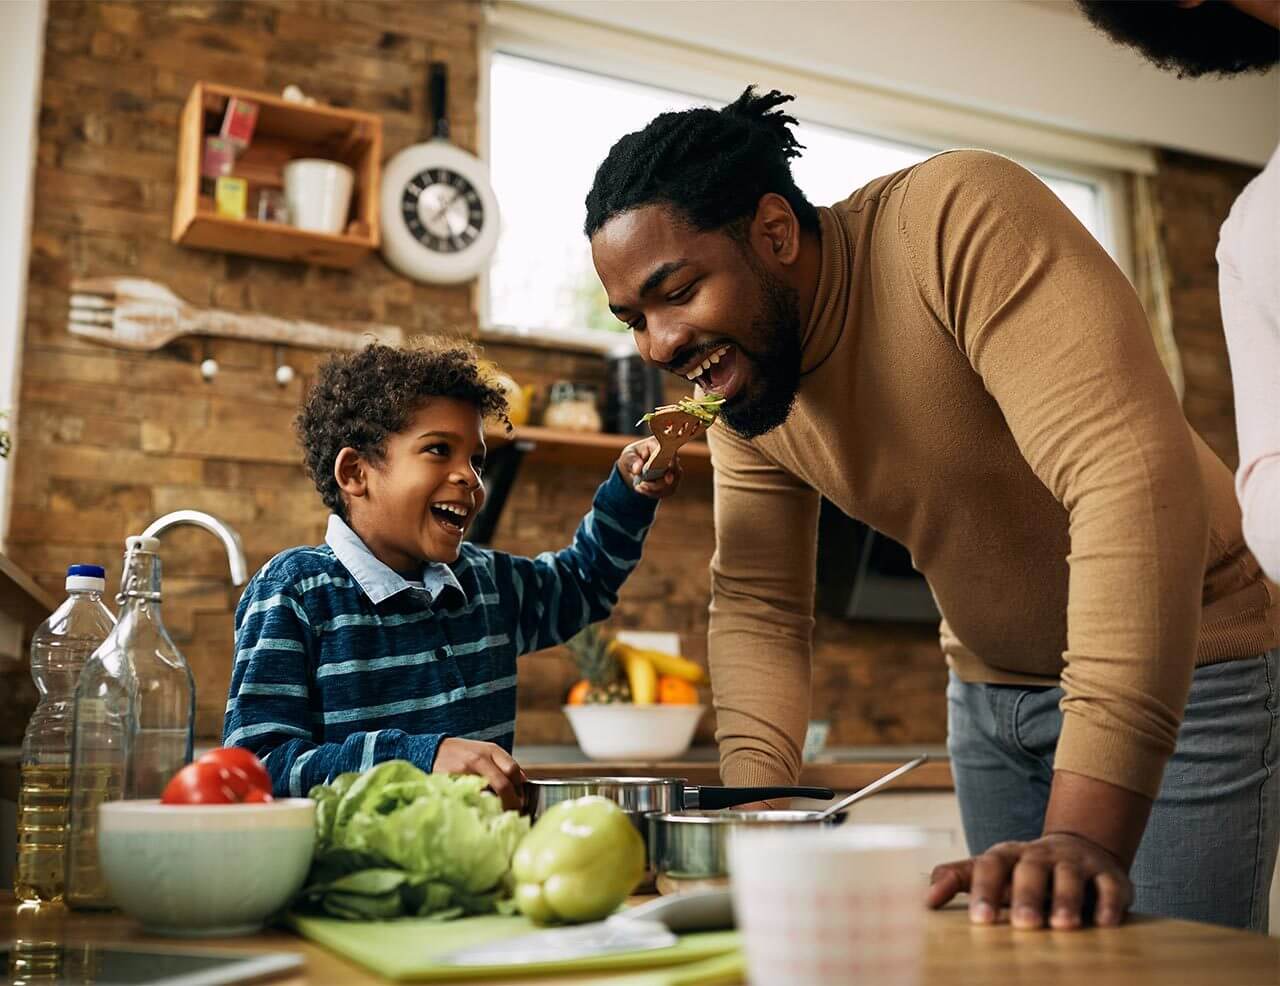 Happy African American boy having fun while feeding his father in the kitchen.